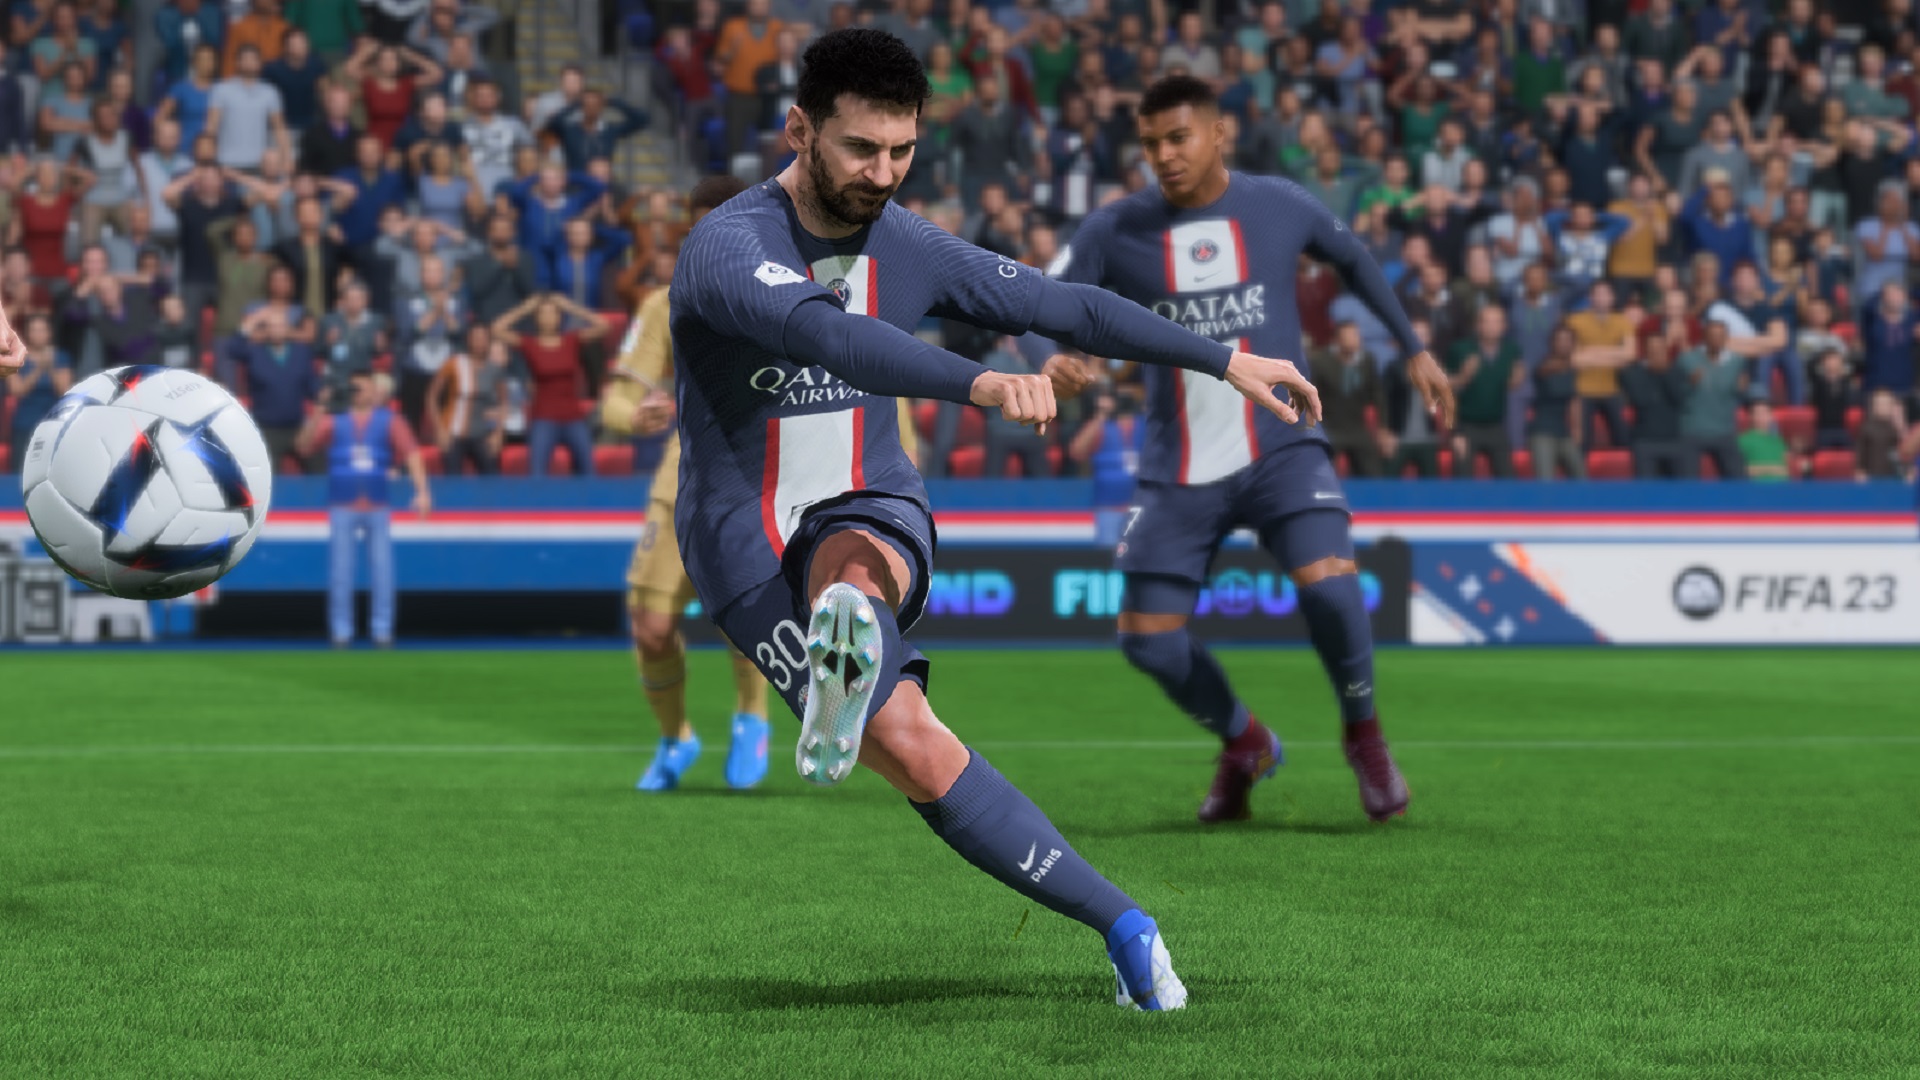 FIFA 23 RTTK players reveal includes Messi, Foden, and Aubameyang